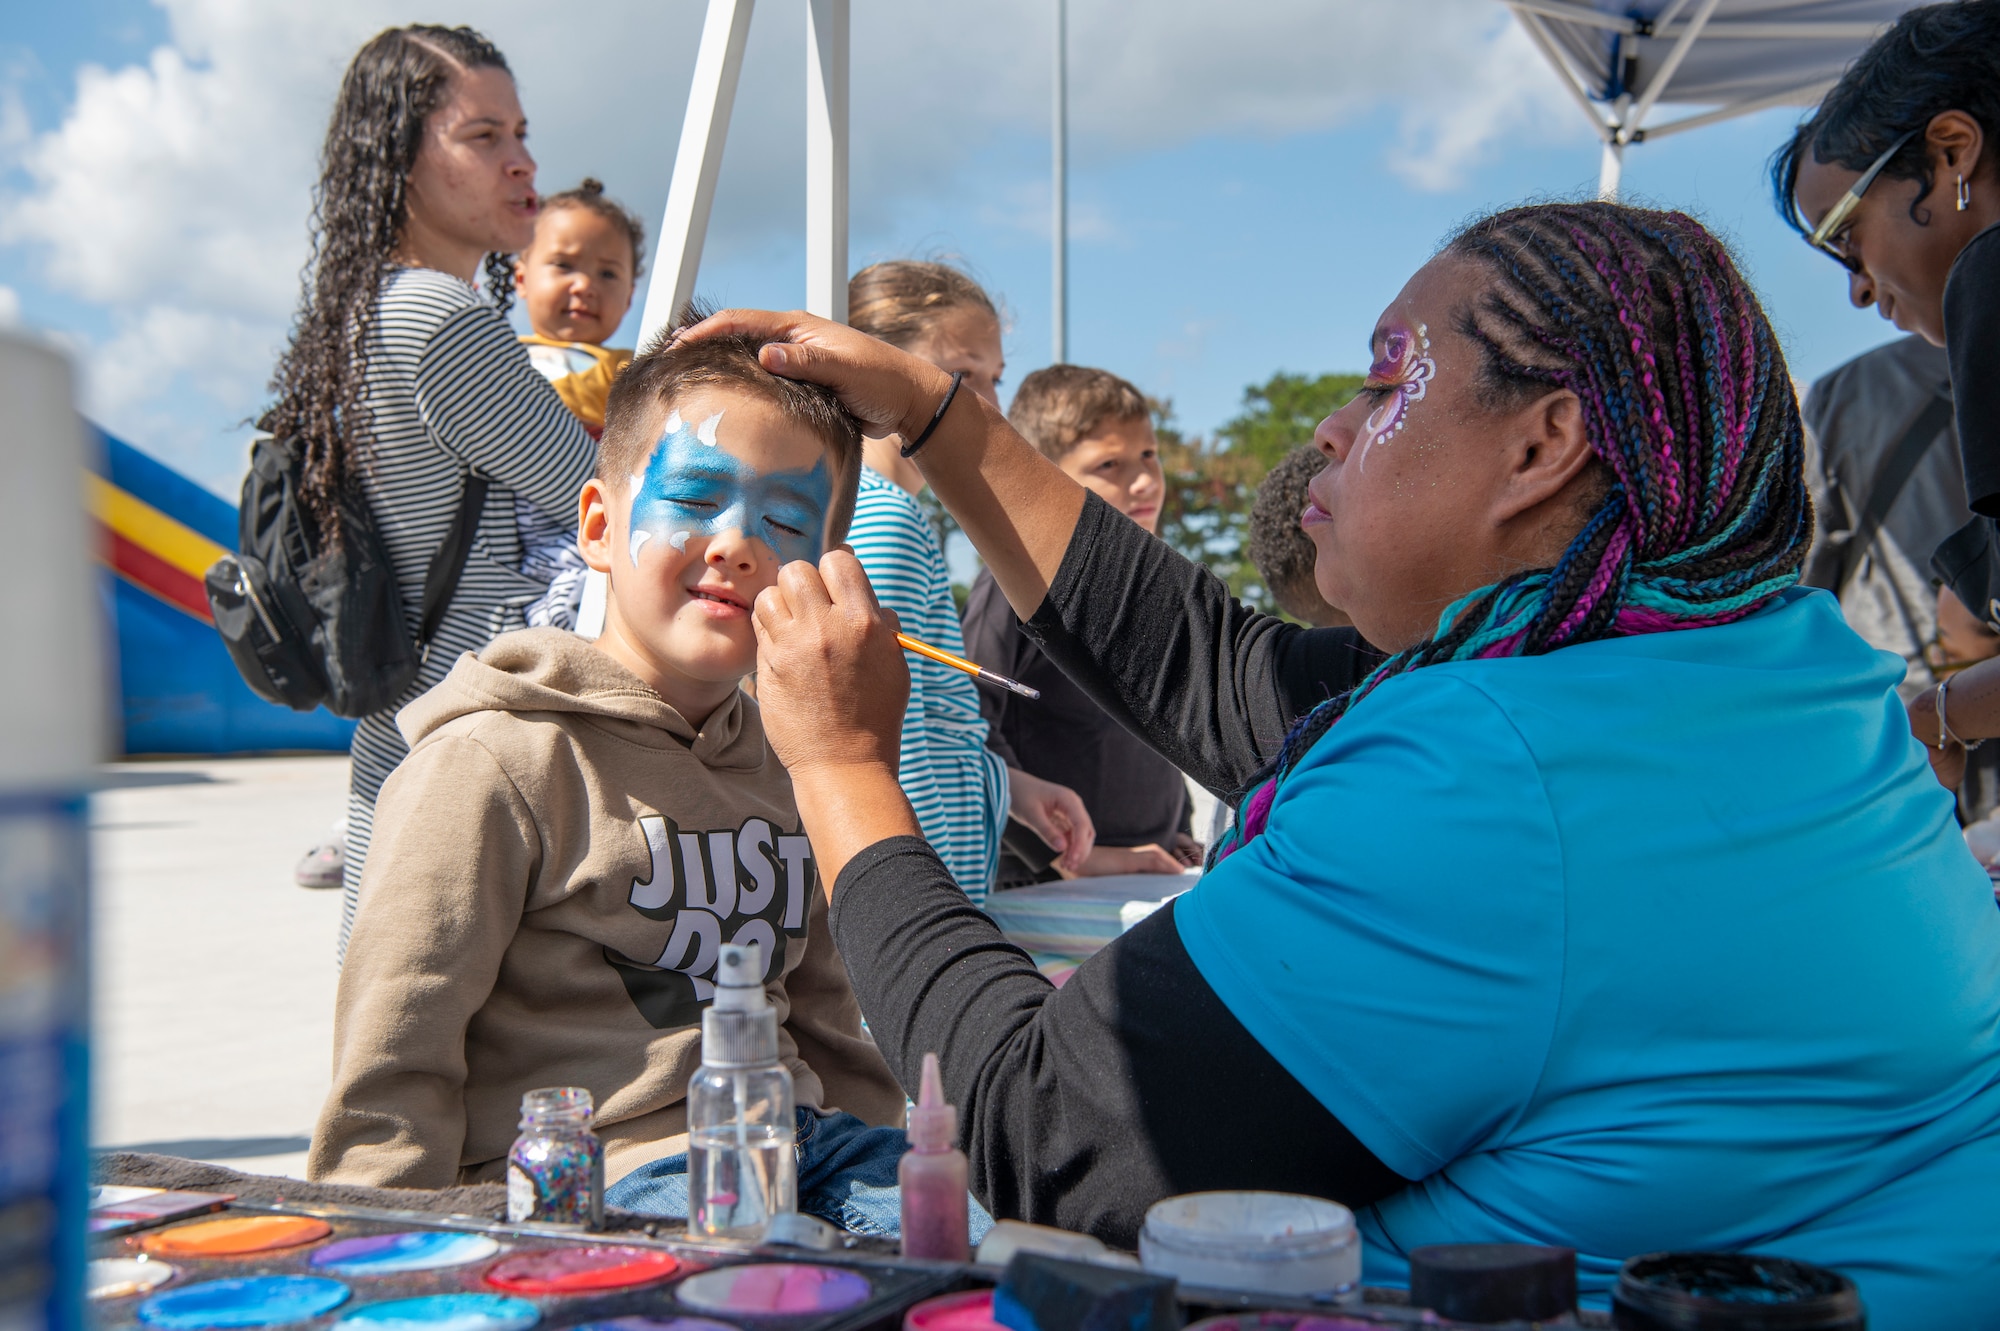 a child gets his face painted by a woman